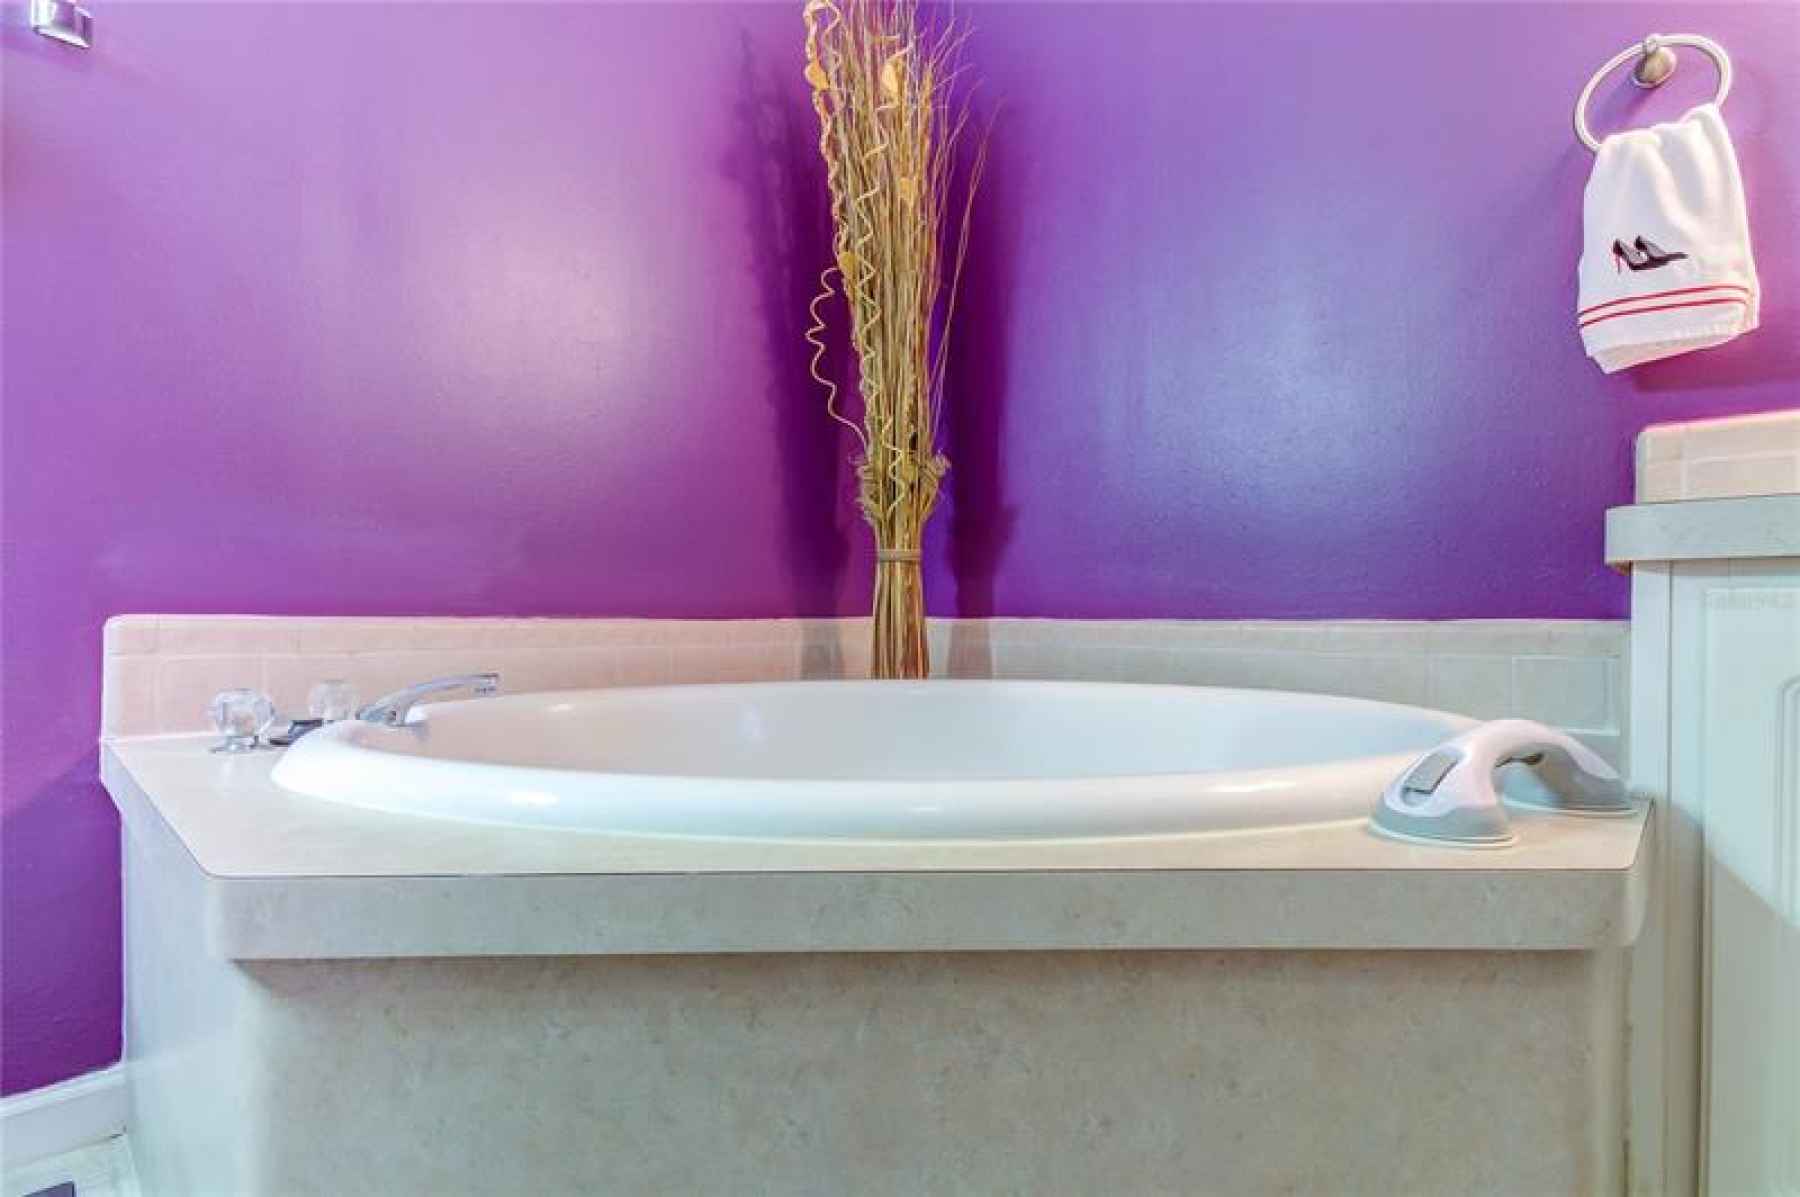 SOAK IN YOUR BATHTUB AFTER A LONG DAY OF WORK!